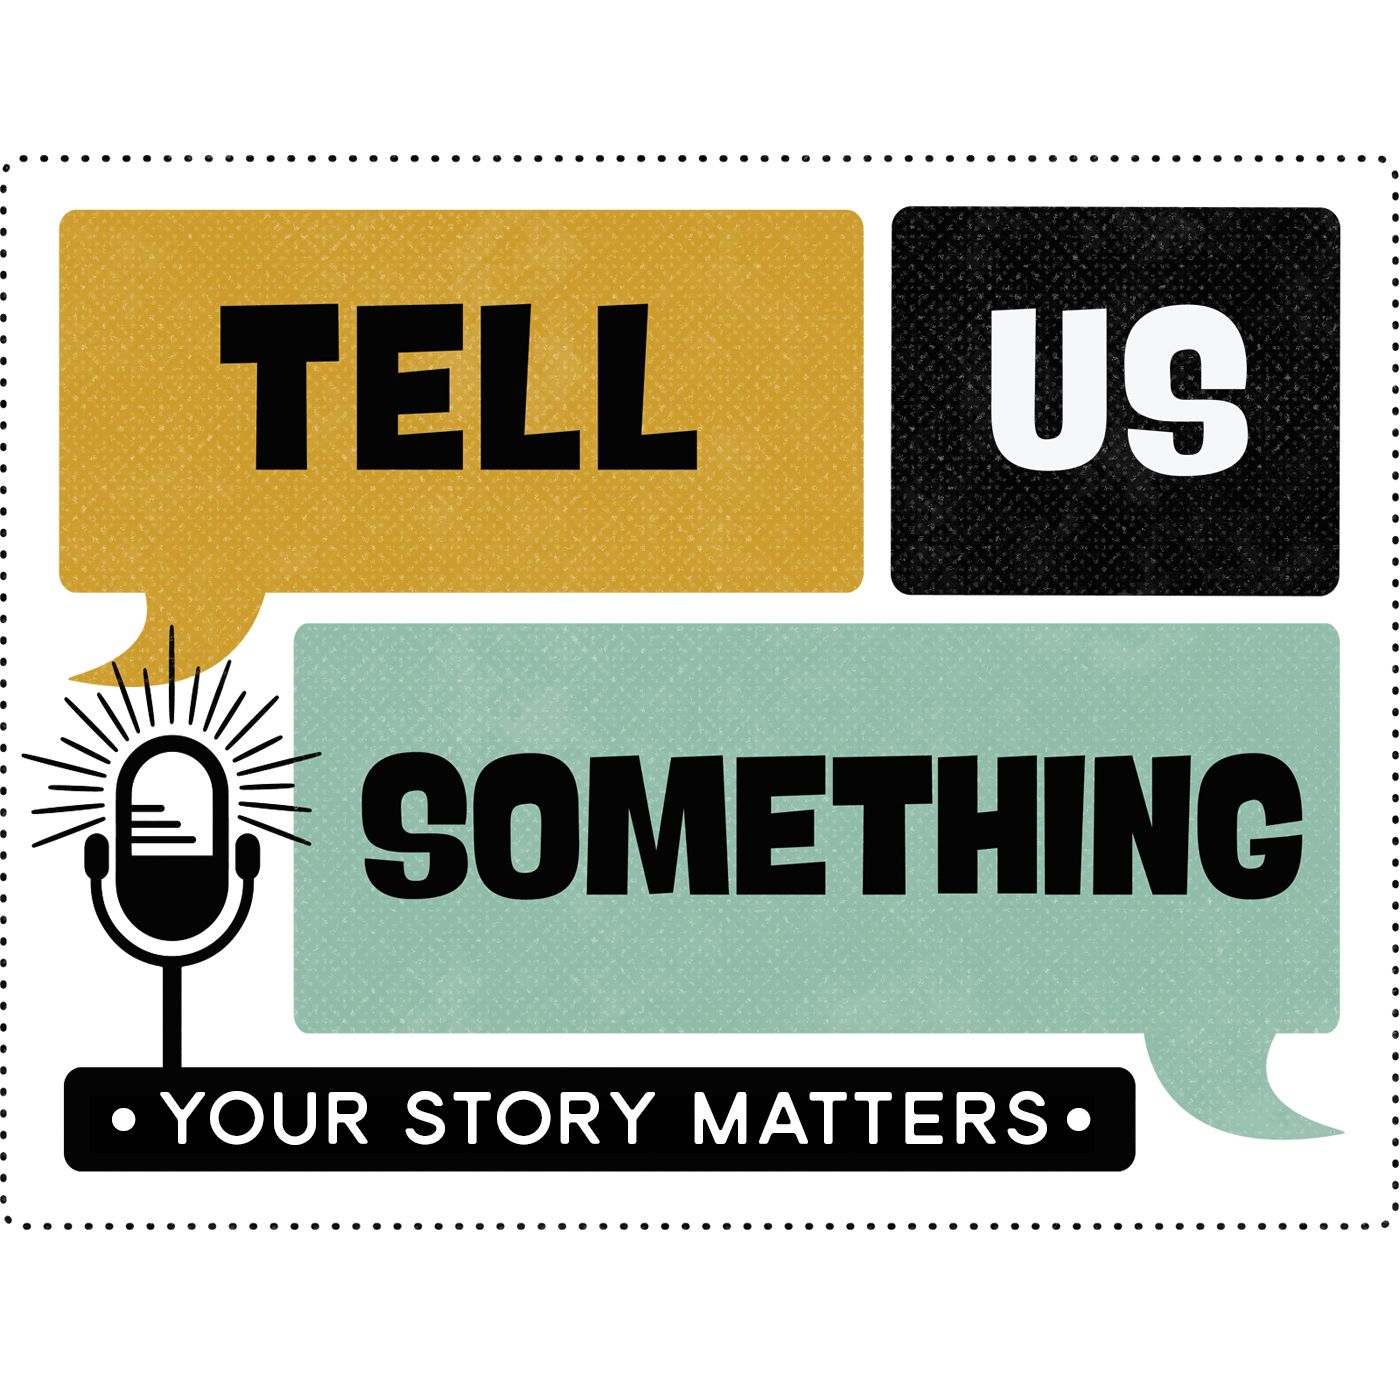 Tell Us Something A Celebration of Storytelling, Community and Each Other